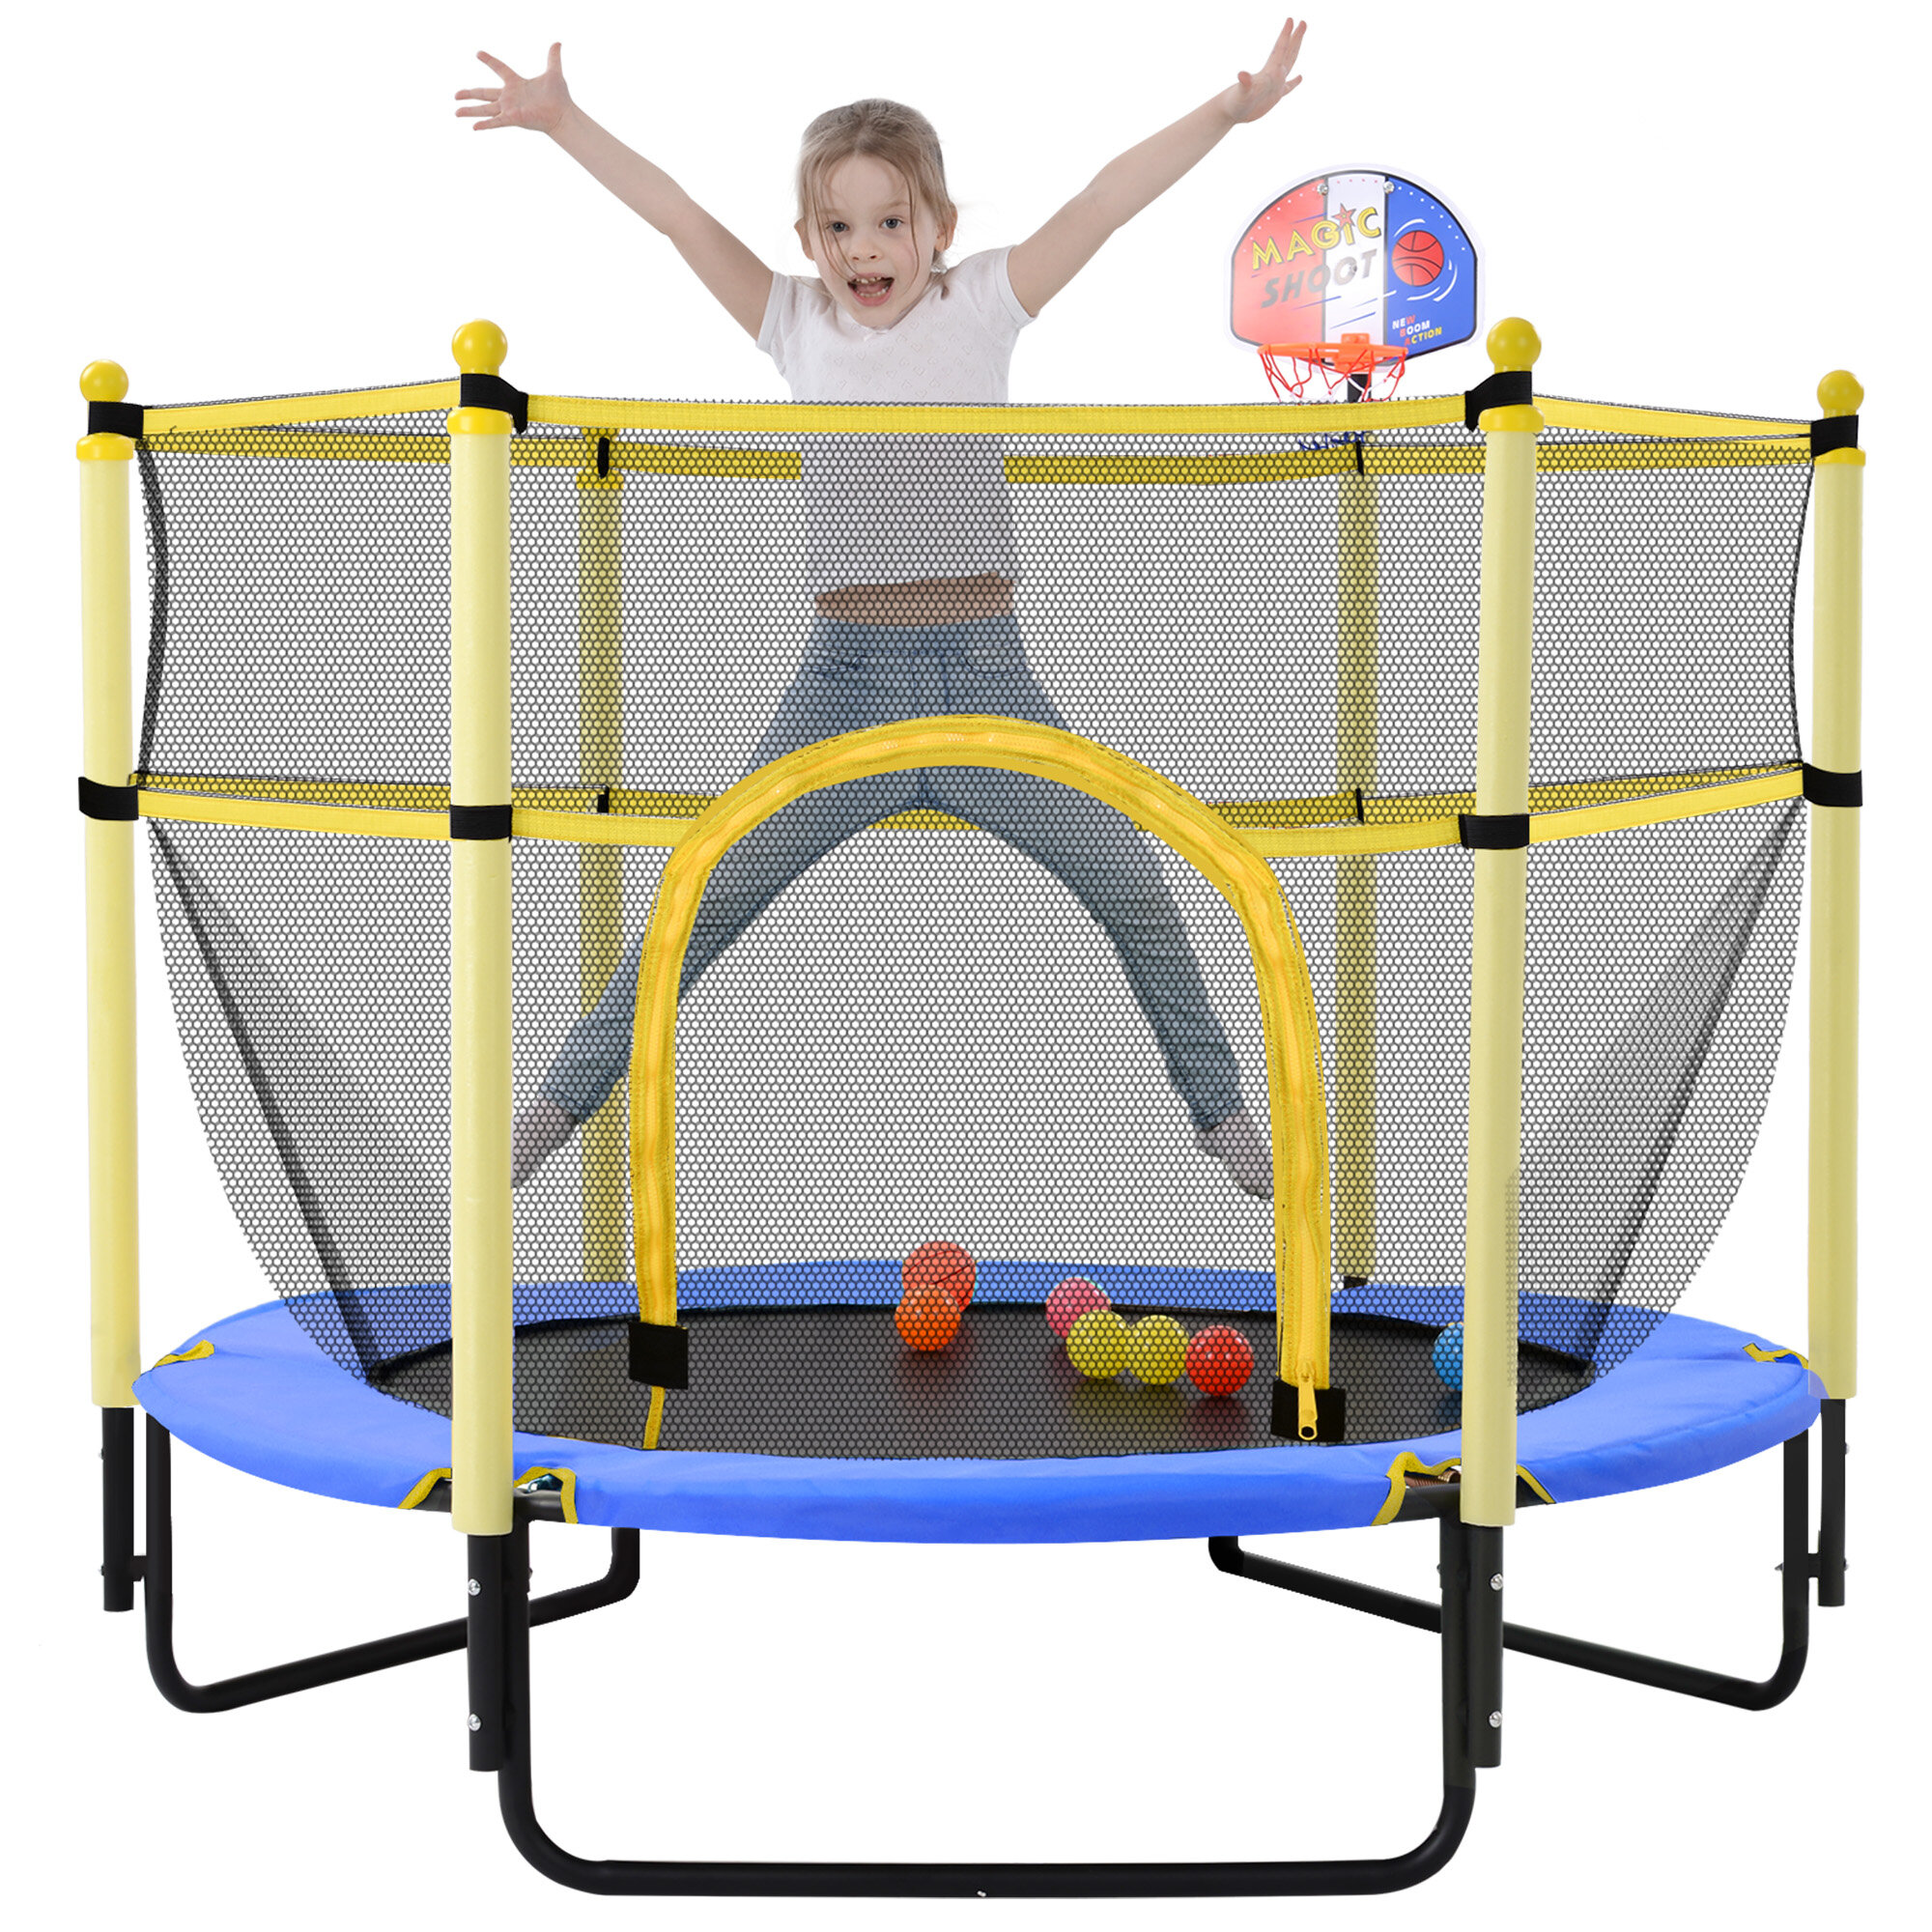 

[USA Direct] Bominfit 5FT Trampoline Kids Aerobic Jump Training with with Basketball Hoop 6 Pcs Balls Home Garden Exerci